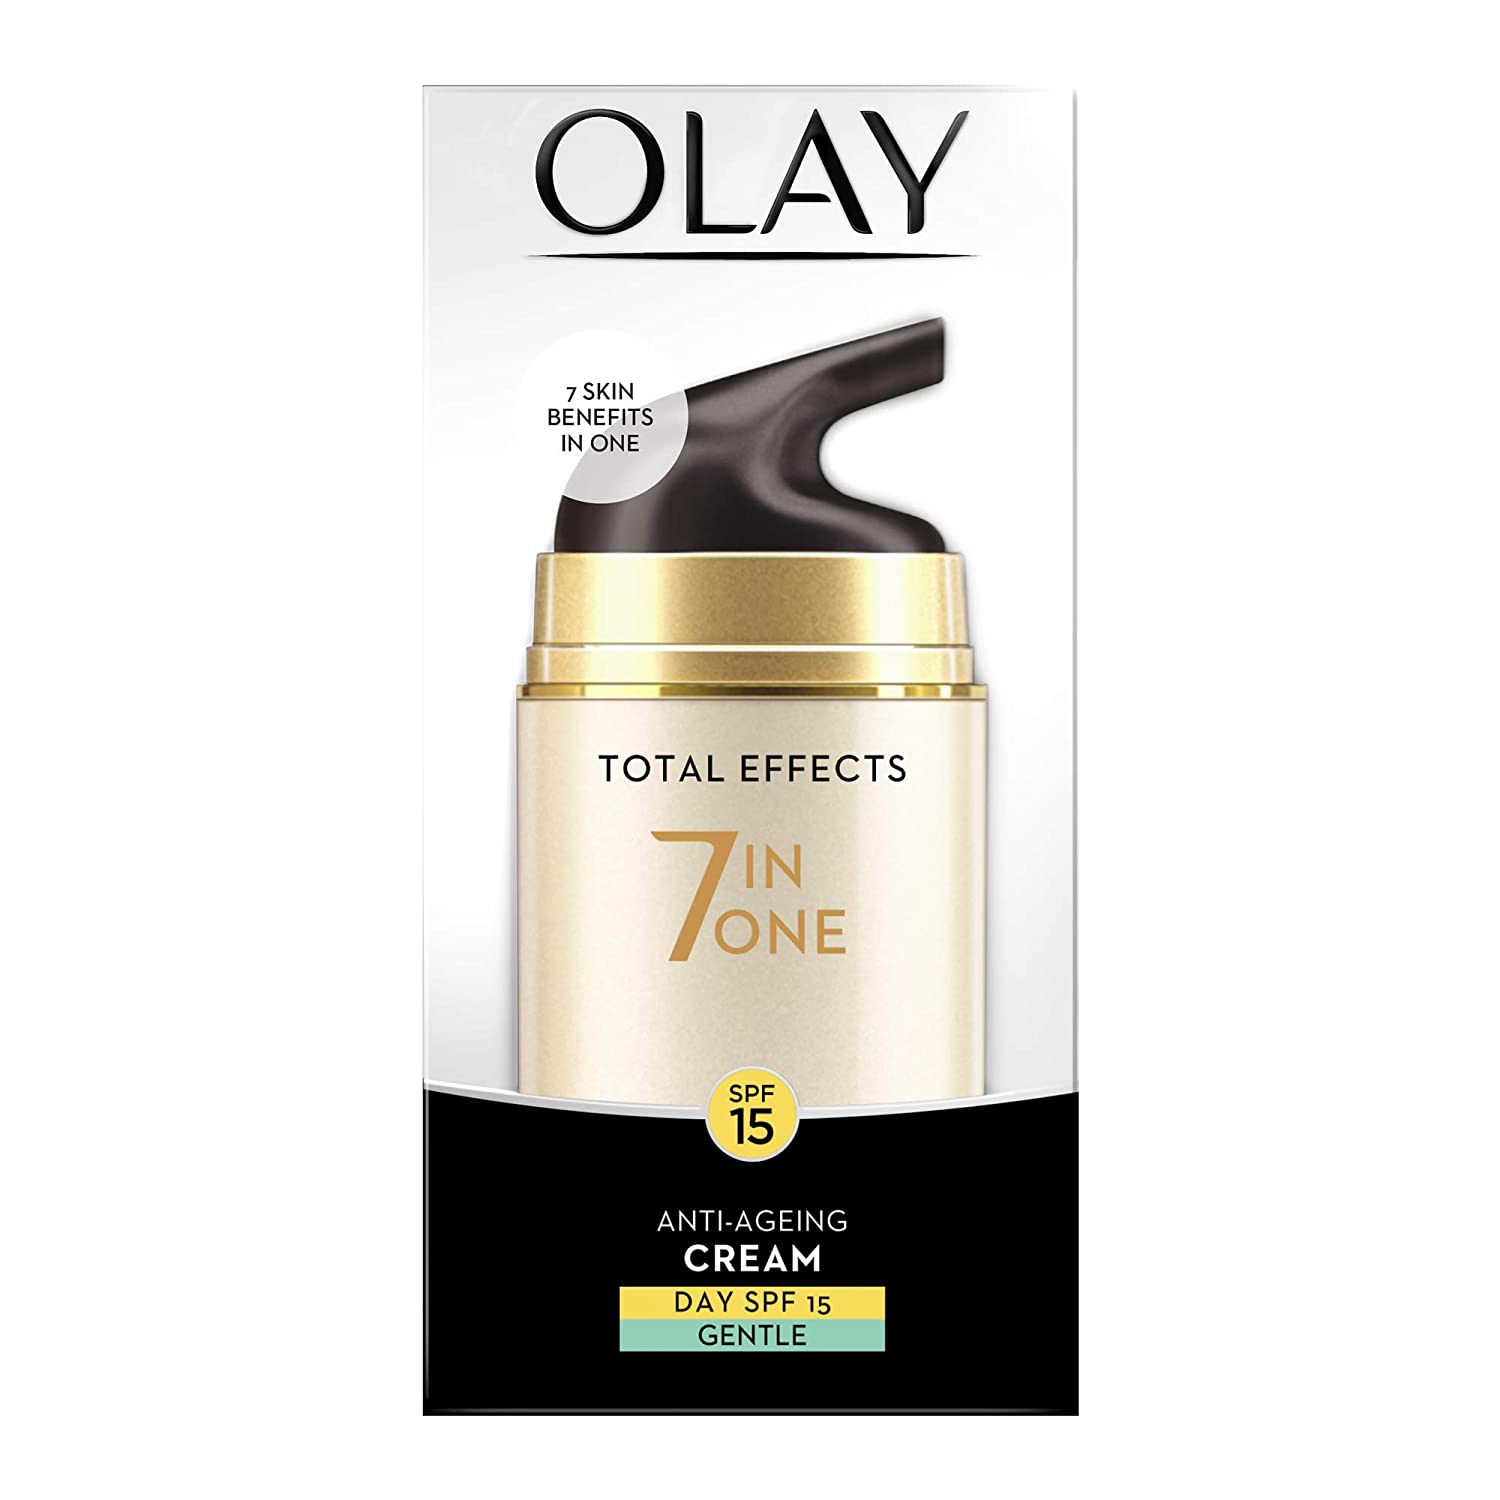 Olay Total Effects 7 IN 1 Anti-Ageing Day Cream SPF 15, 50 gm, Pack of 1 